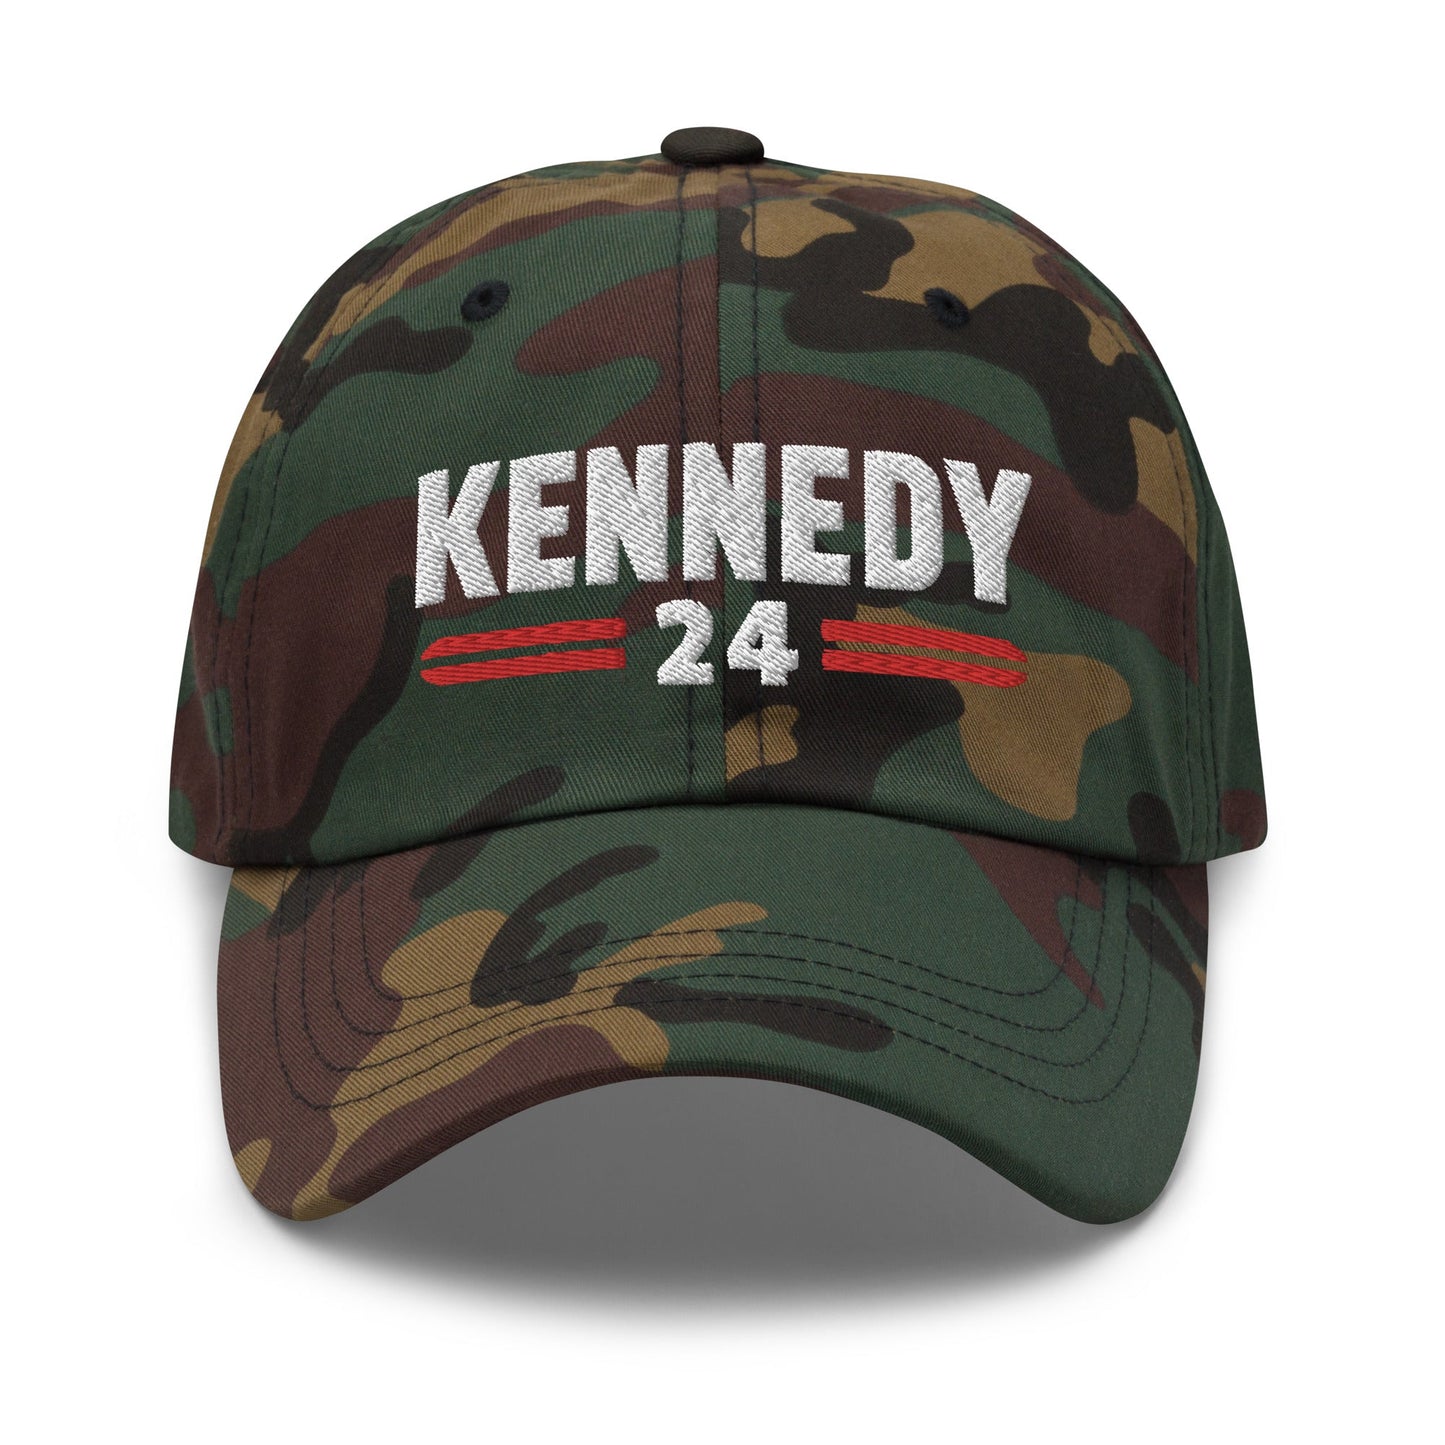 Kennedy Classic Embroidered Dad Hat - TEAM KENNEDY. All rights reserved